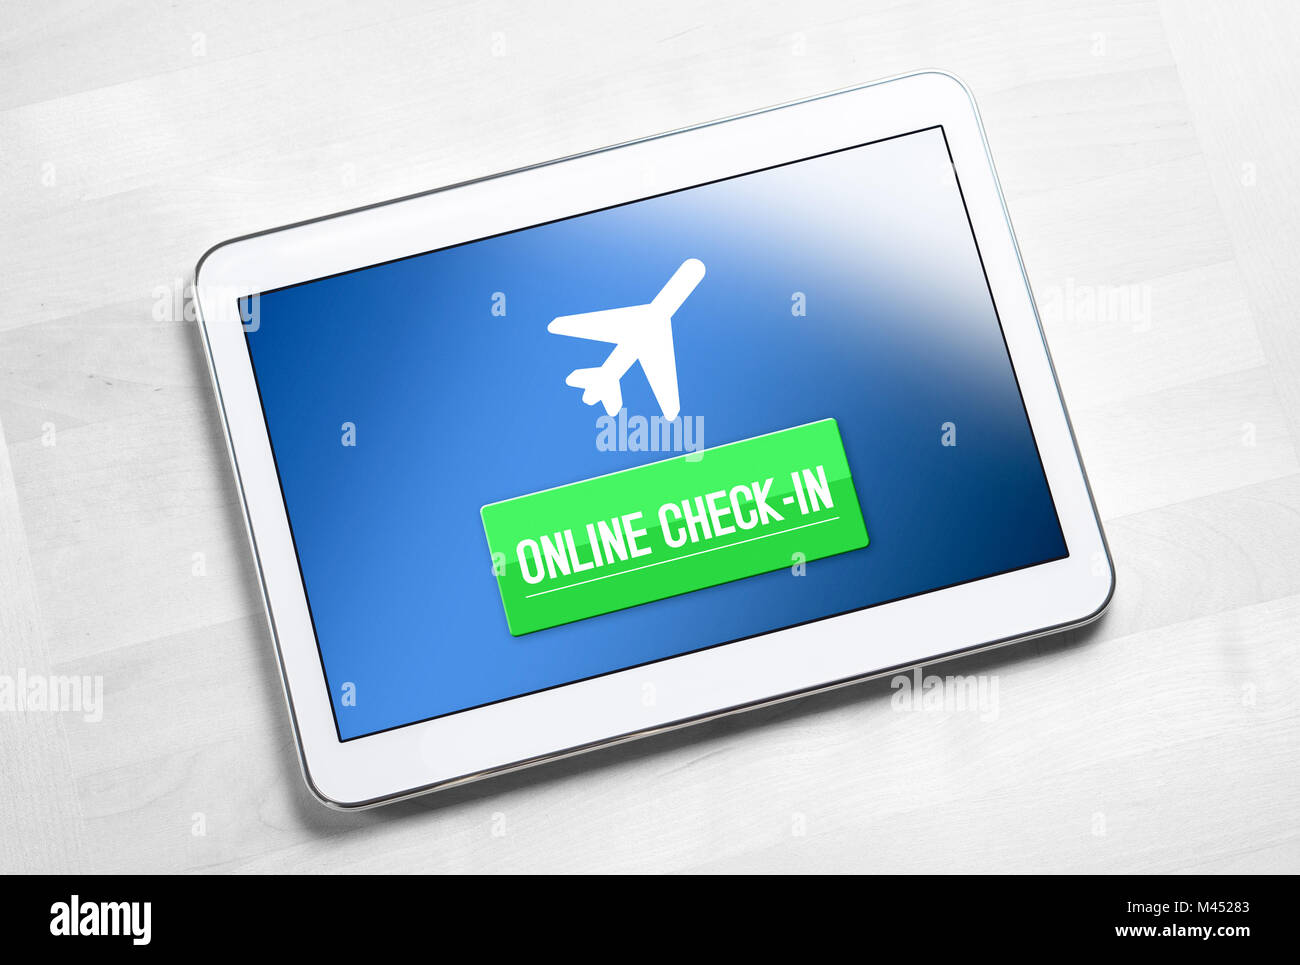 Online check in application or website on tablet. Mobile device on wooden table ready to checking in to flight on internet. Web self service provided. Stock Photo